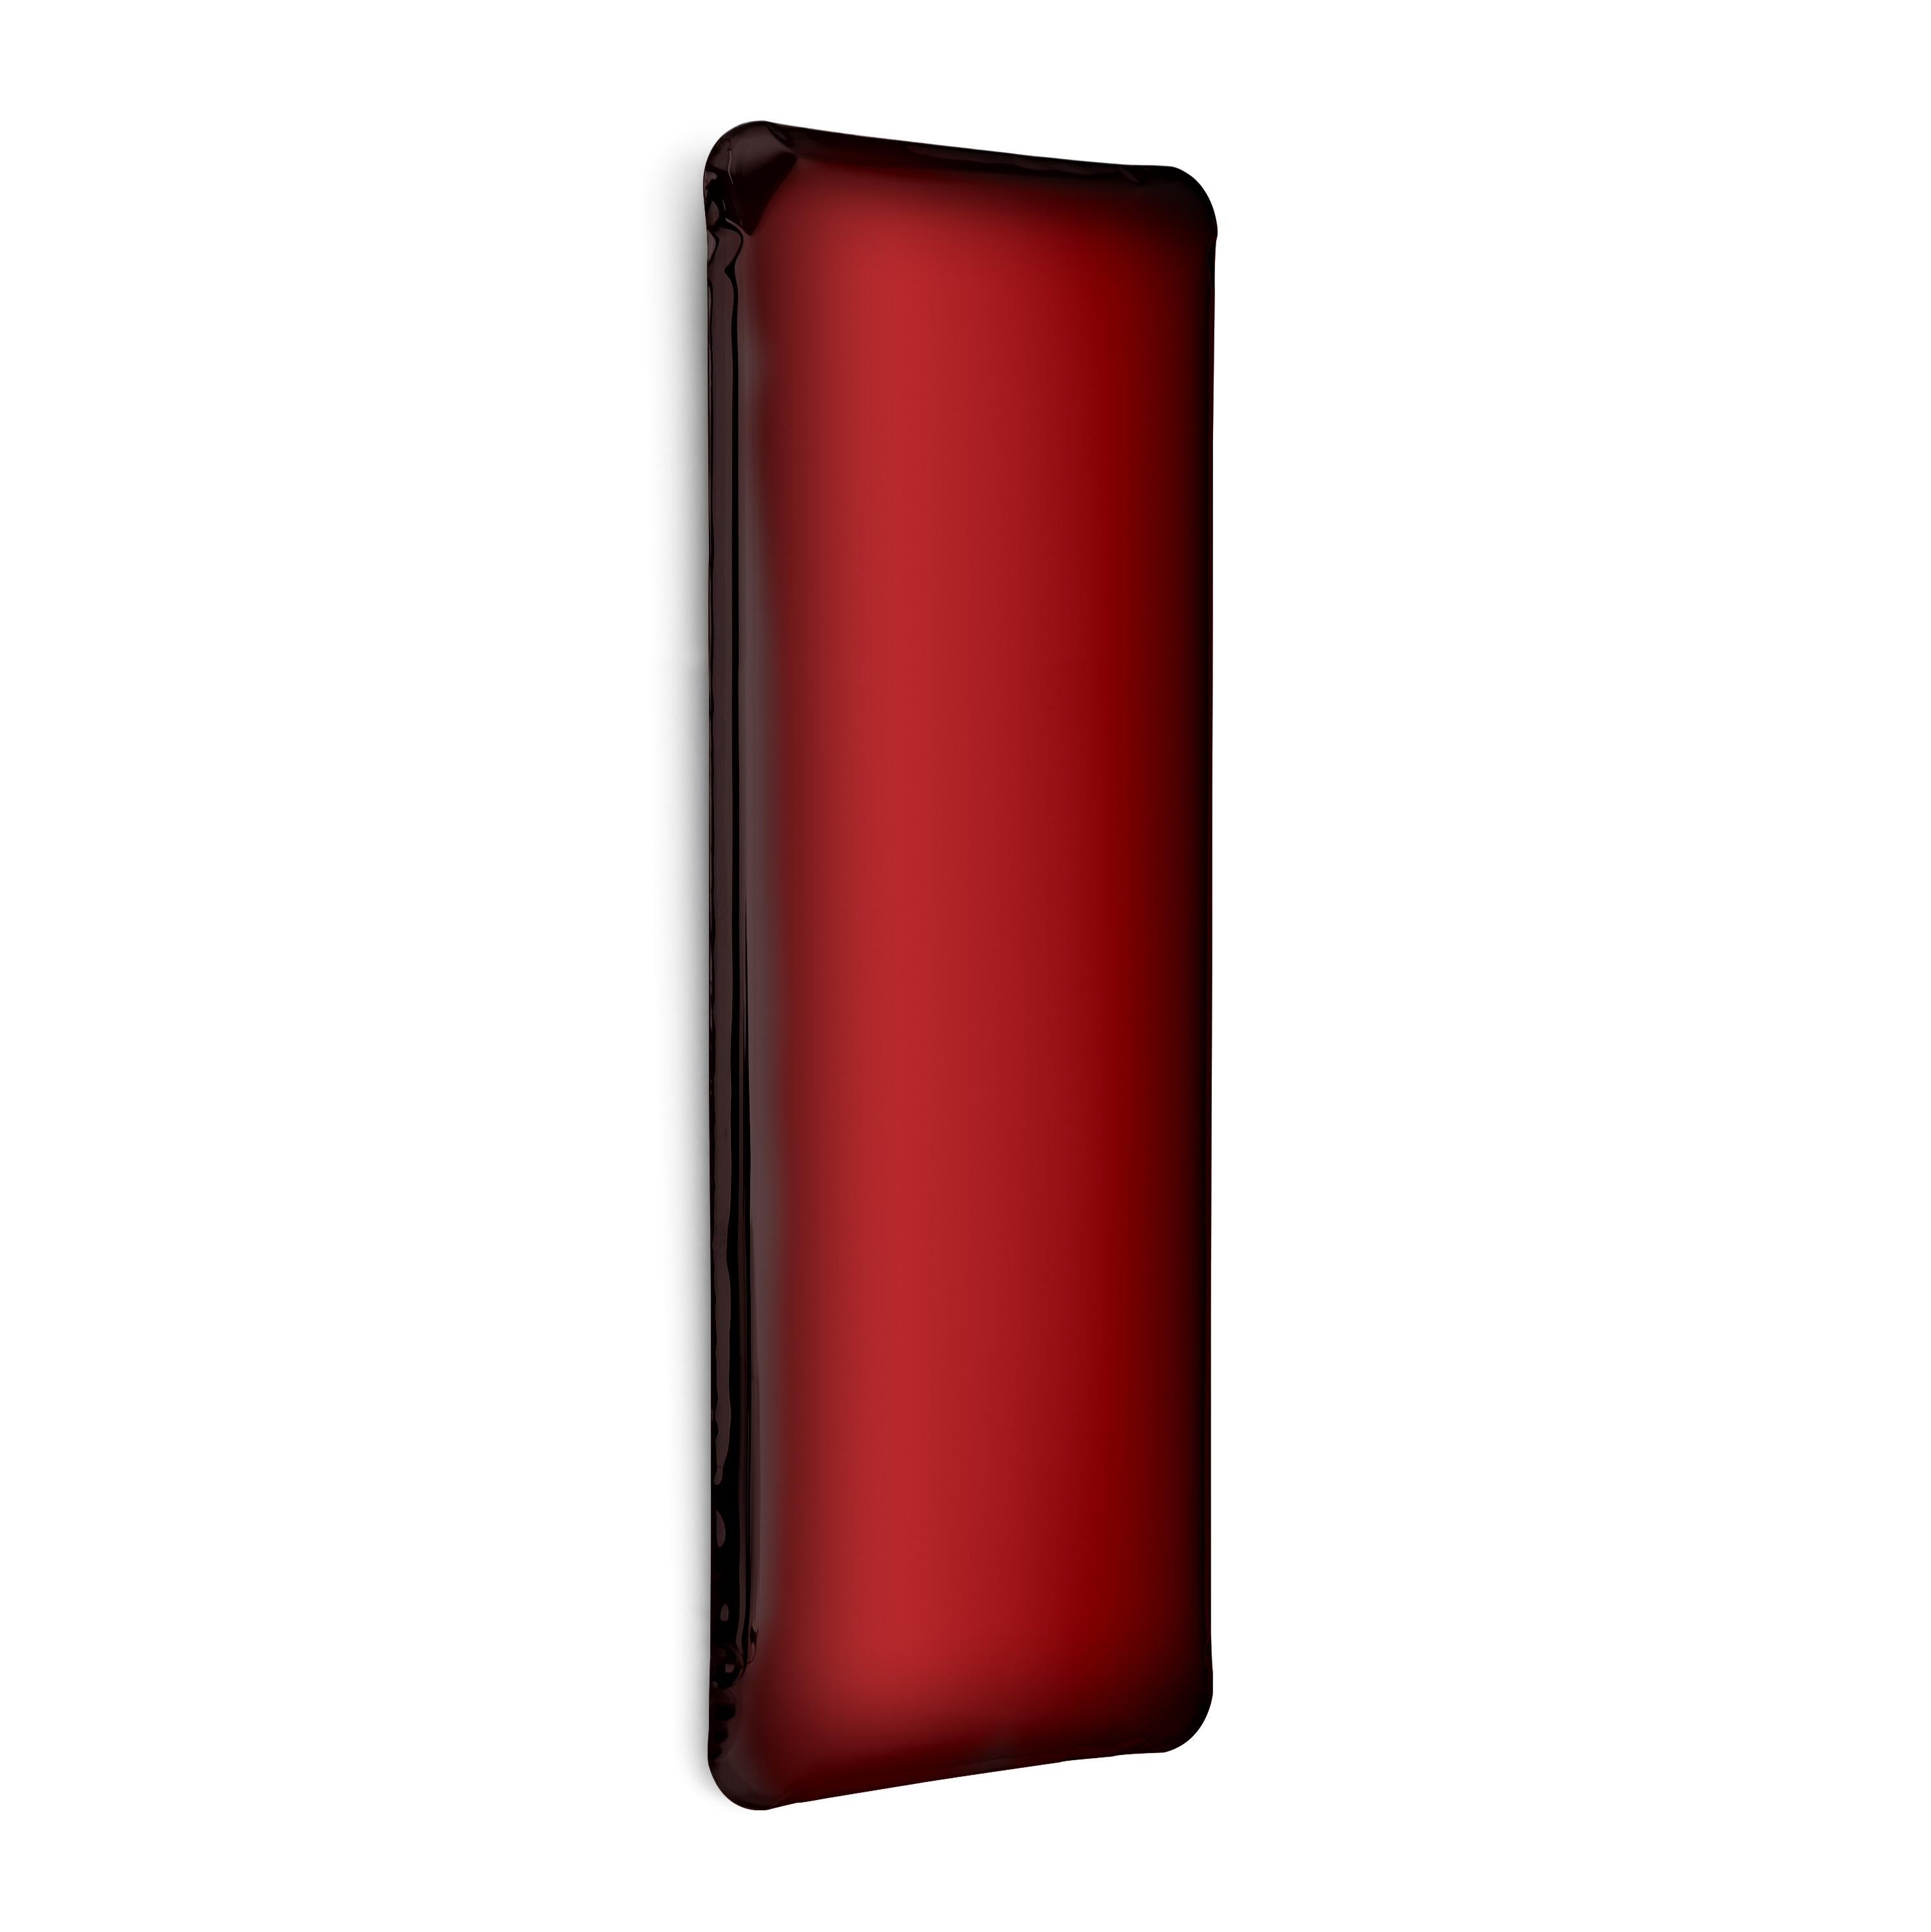 Red Rubin Tafla Q1 sculptural wall mirror by Zieta
Dimensions: D 6 x W 60 x H 180 cm 
Material: Stainless steel. 
Finish: Red Rubin.
Available in finishes: Stainless Steel, Deep Space Blue, Emerald, Saphire, Saphire/Emerald, Dark Matter, and Red